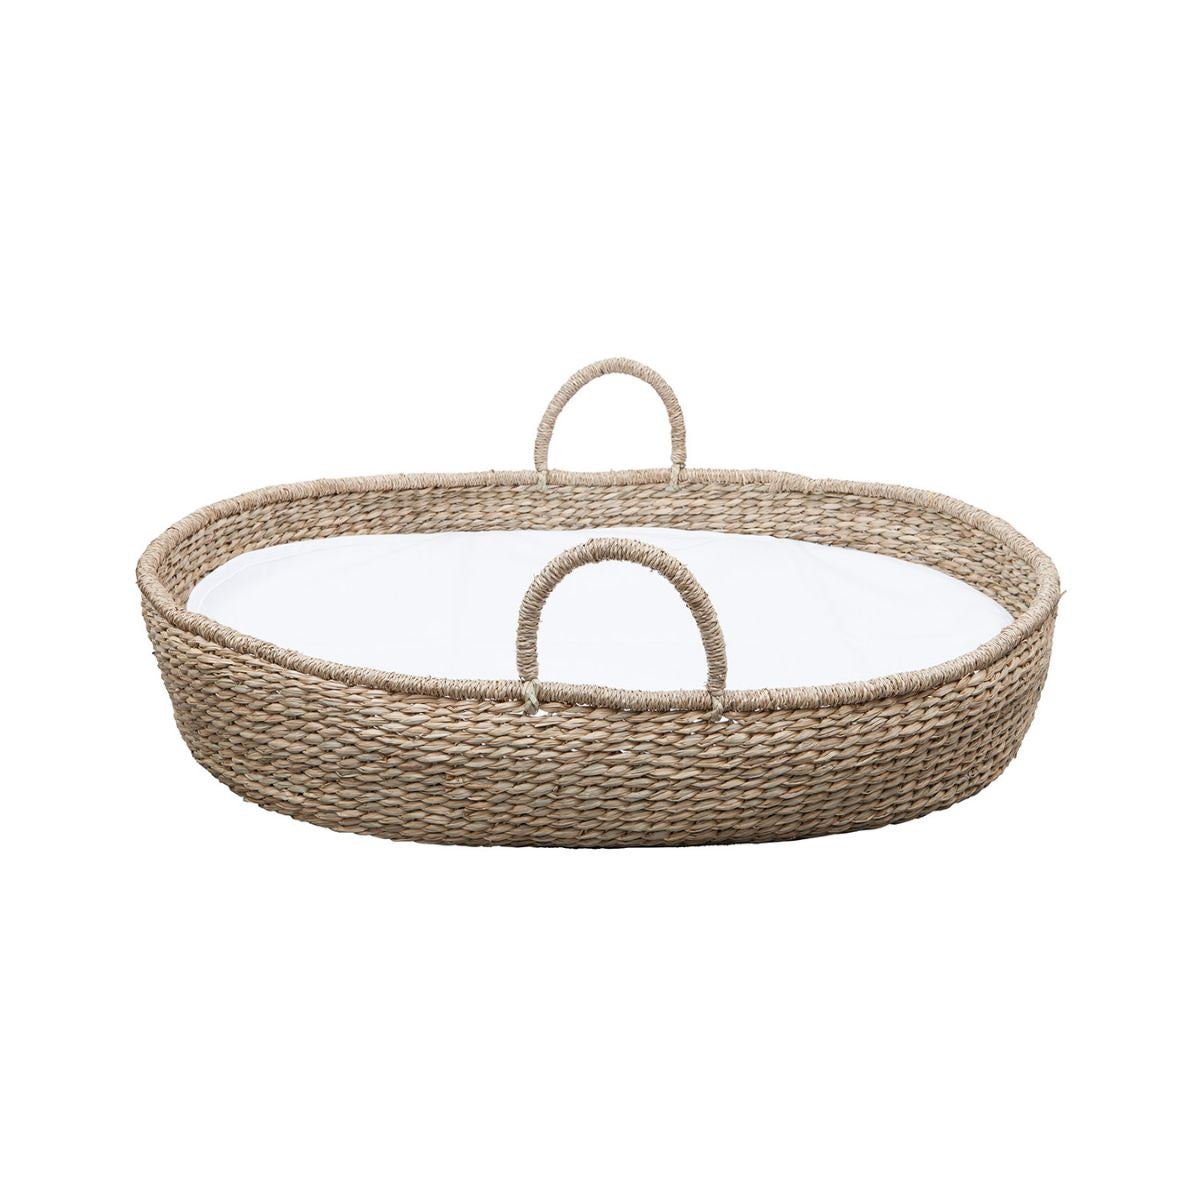 Bermbach Handcrafted Frida Changing Basket Changing Pad Baby Nursery Essentials Eco-Friendly